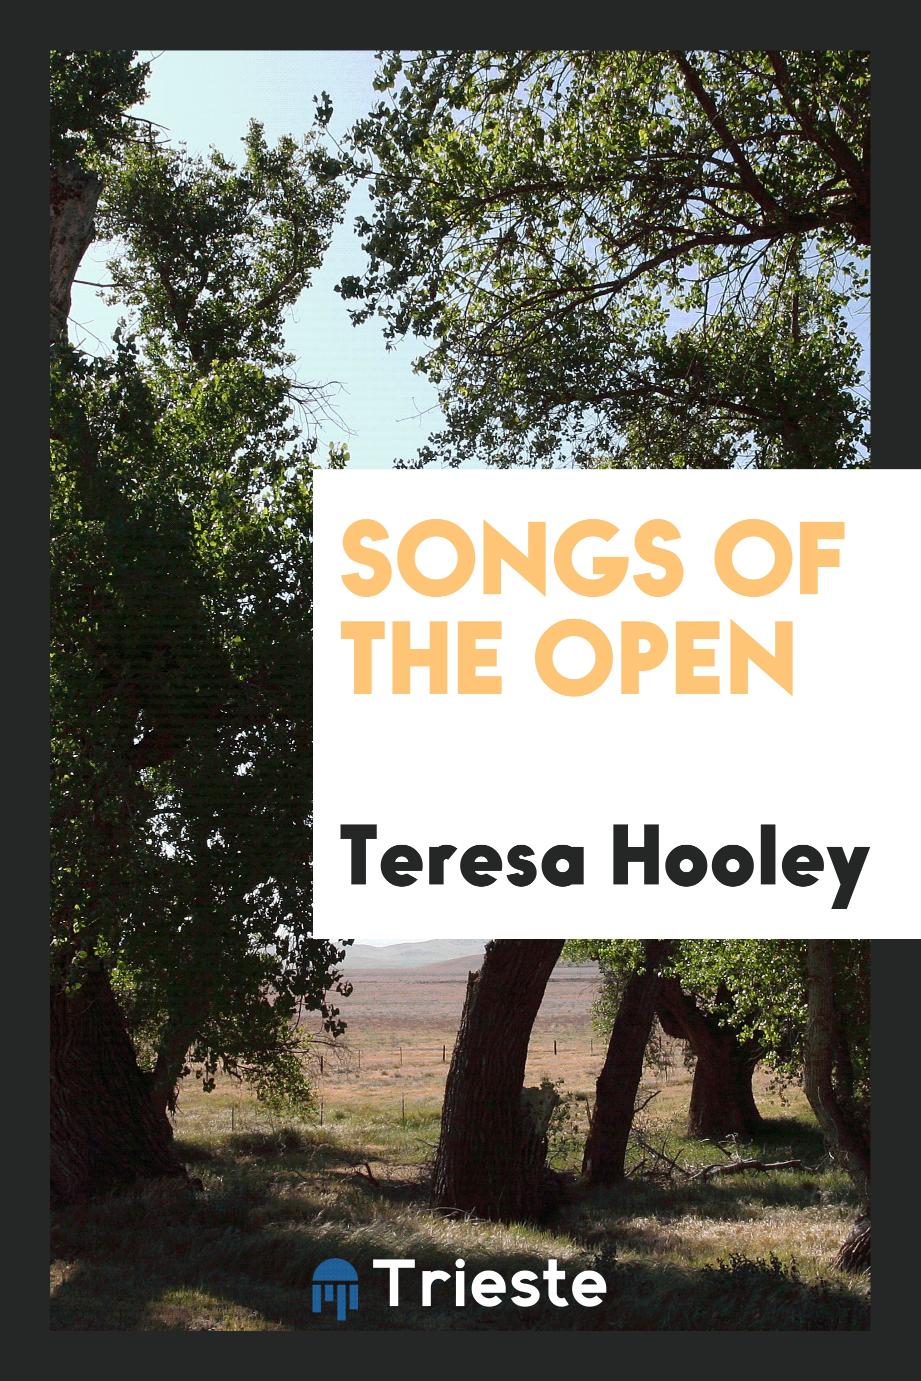 Songs of the open